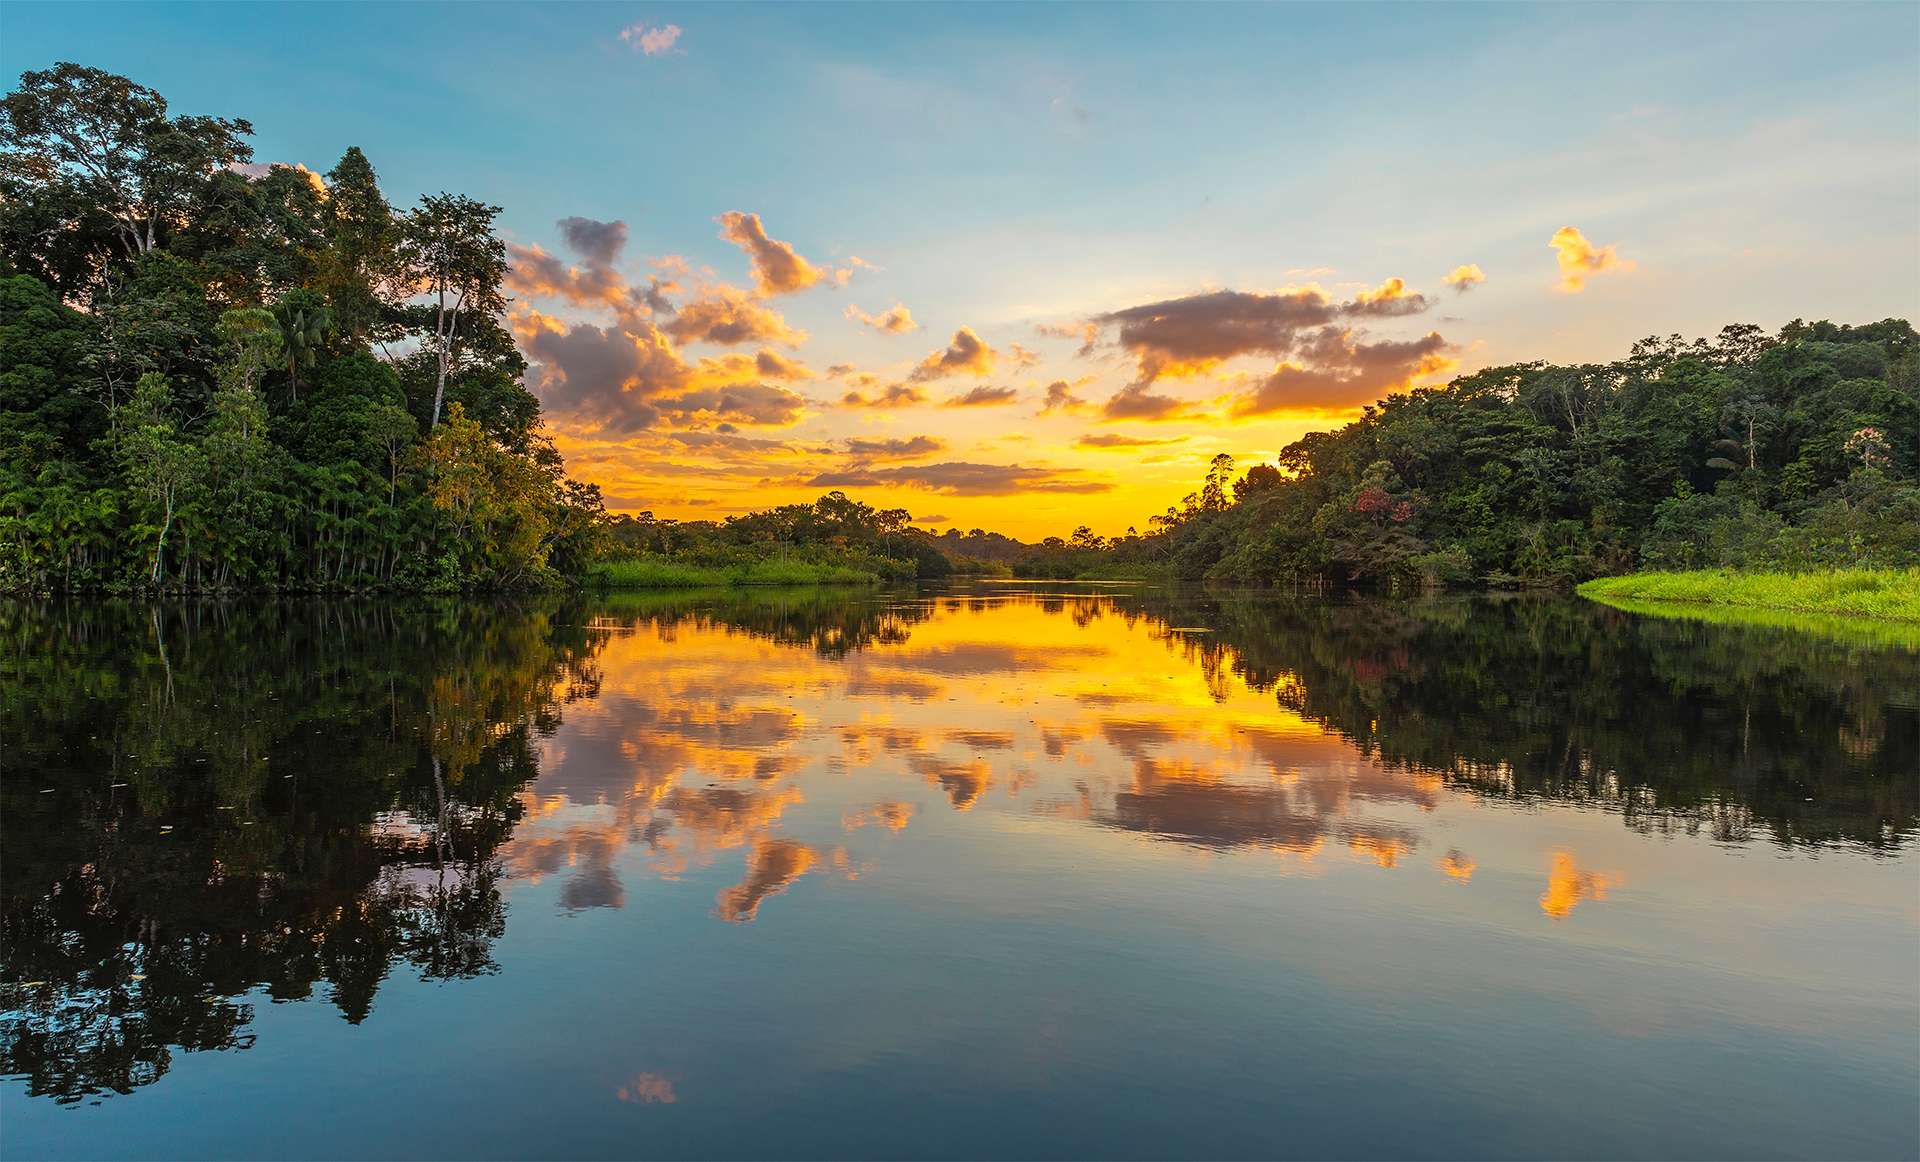 Panorama of a sunset in the Amazon Rainforest which comprise the countries of Brazil, Bolivia, Colombia, Ecuador, Guyana, Peru, Suriname and Venezuela.